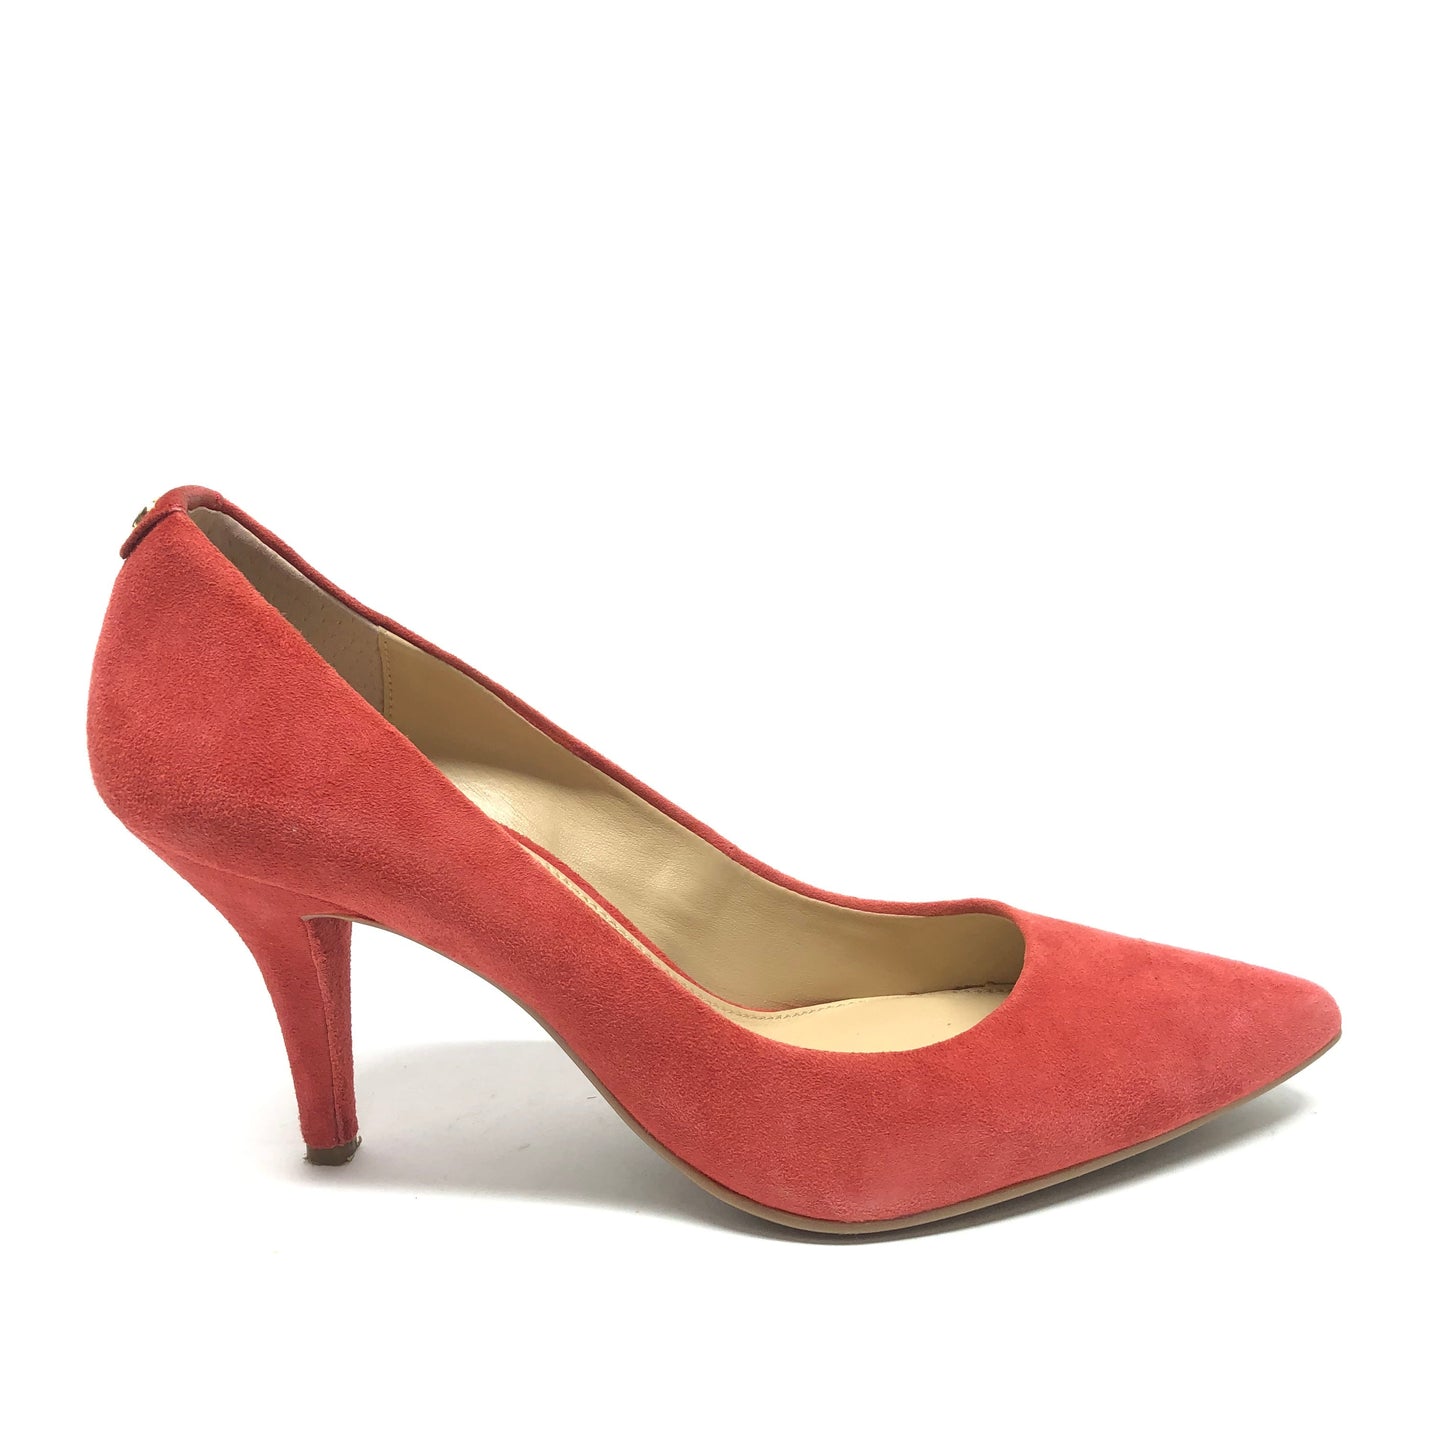 Red Shoes Heels Stiletto Michael By Michael Kors, Size 8